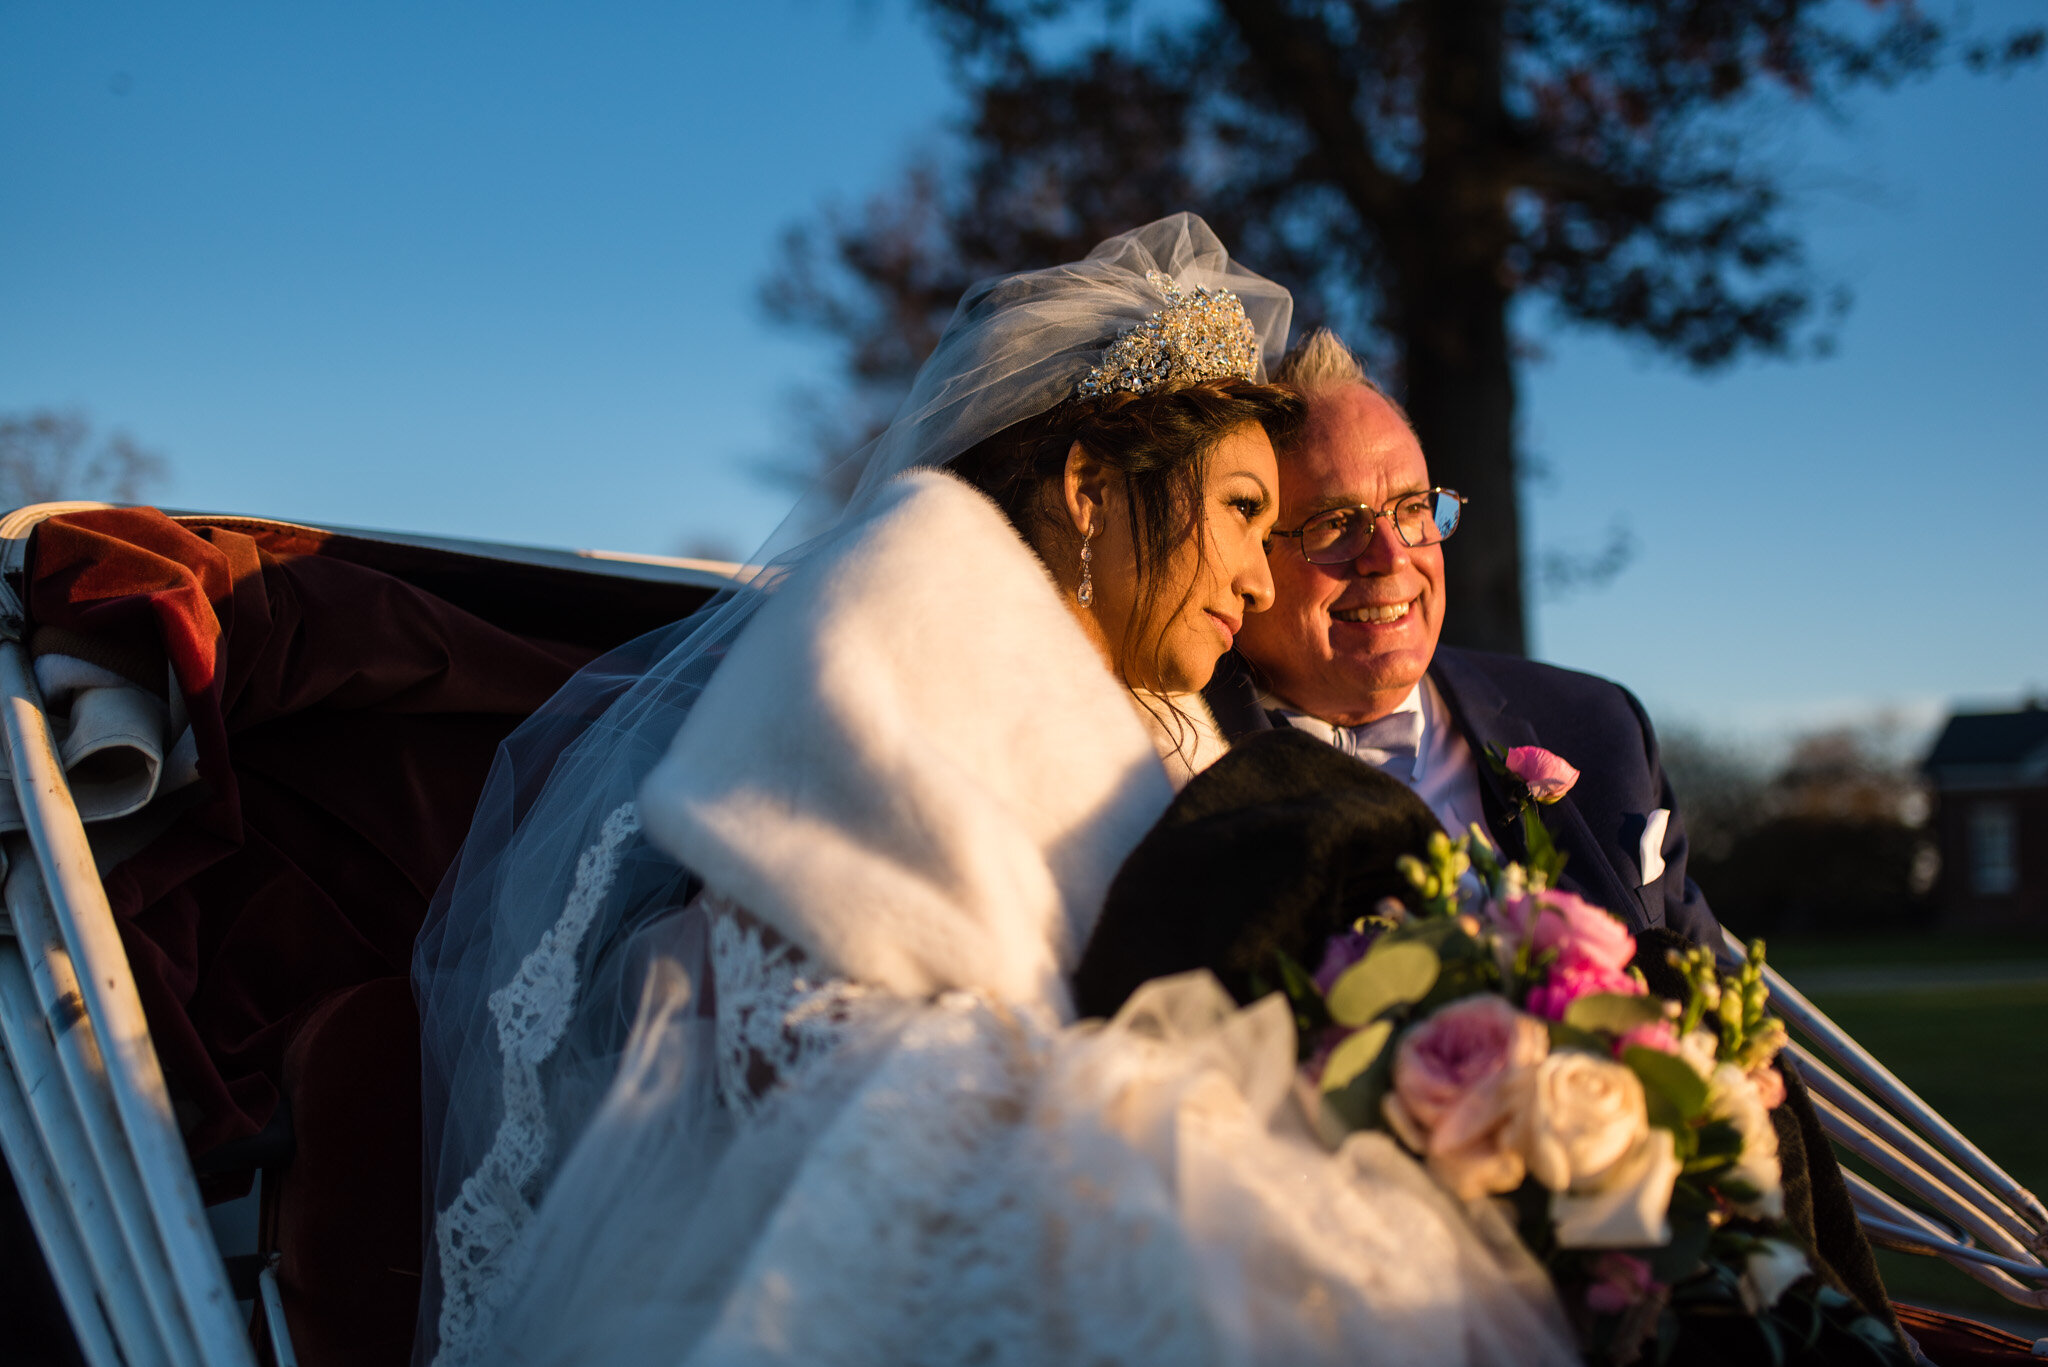 Bride and groom enjoying time together in a horse drawn carriage